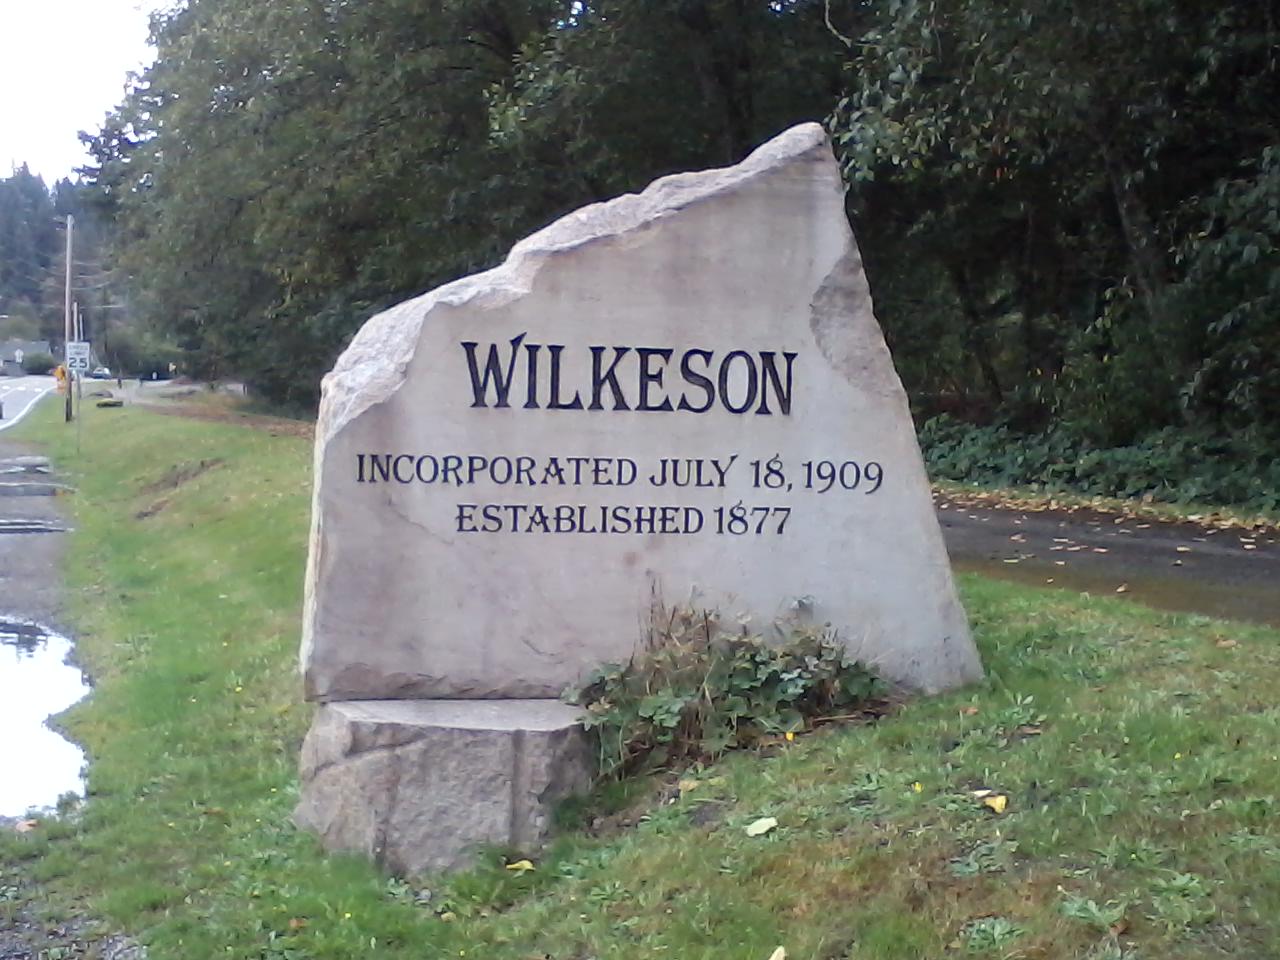 i stopped at Wilkeson and rode through on my 67 mile round trip bicycle ride on my blue araya.